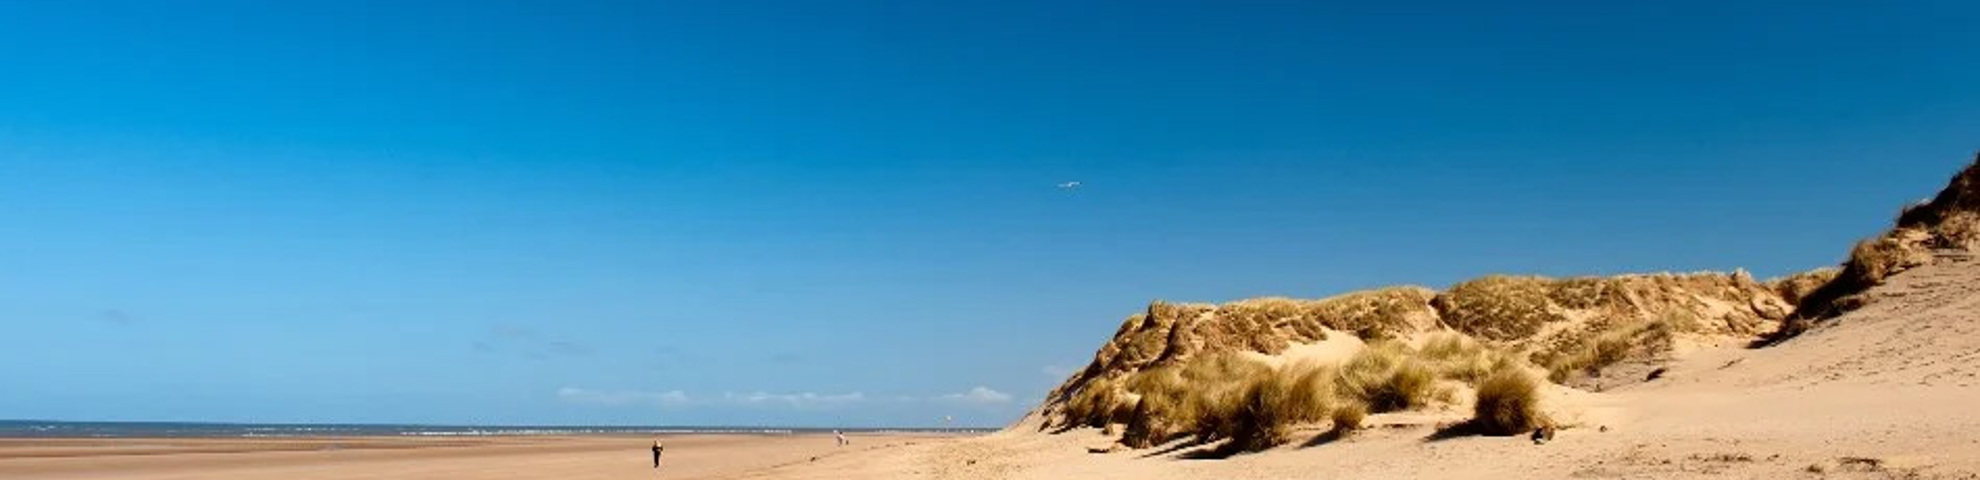 The beach on a sunny day. There is sand dunes and blue sky.